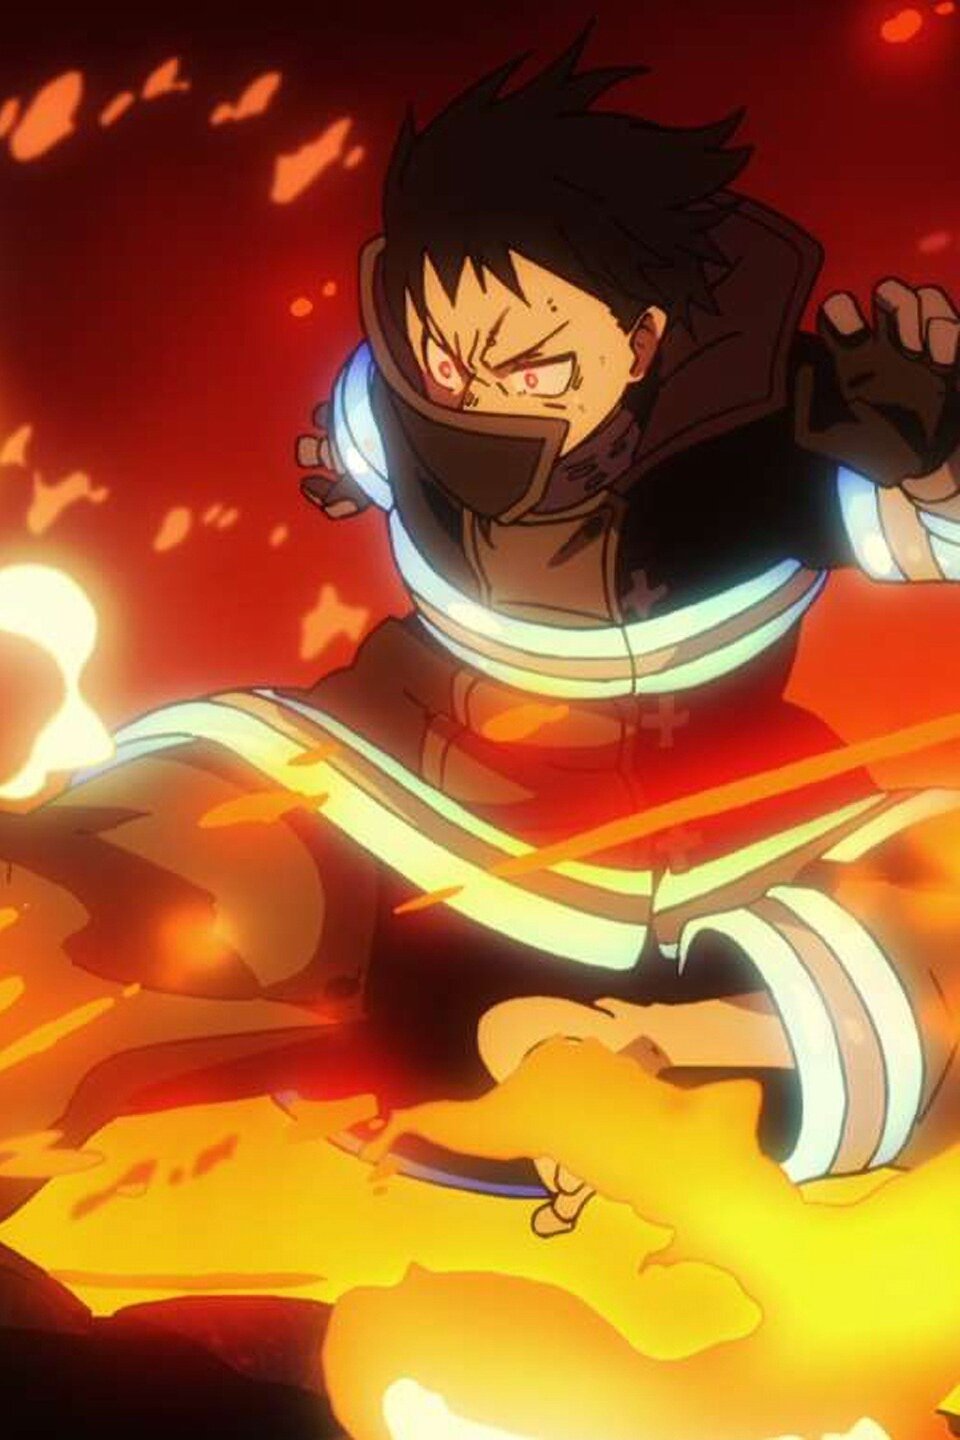 Share more than 80 fire squad anime - in.cdgdbentre